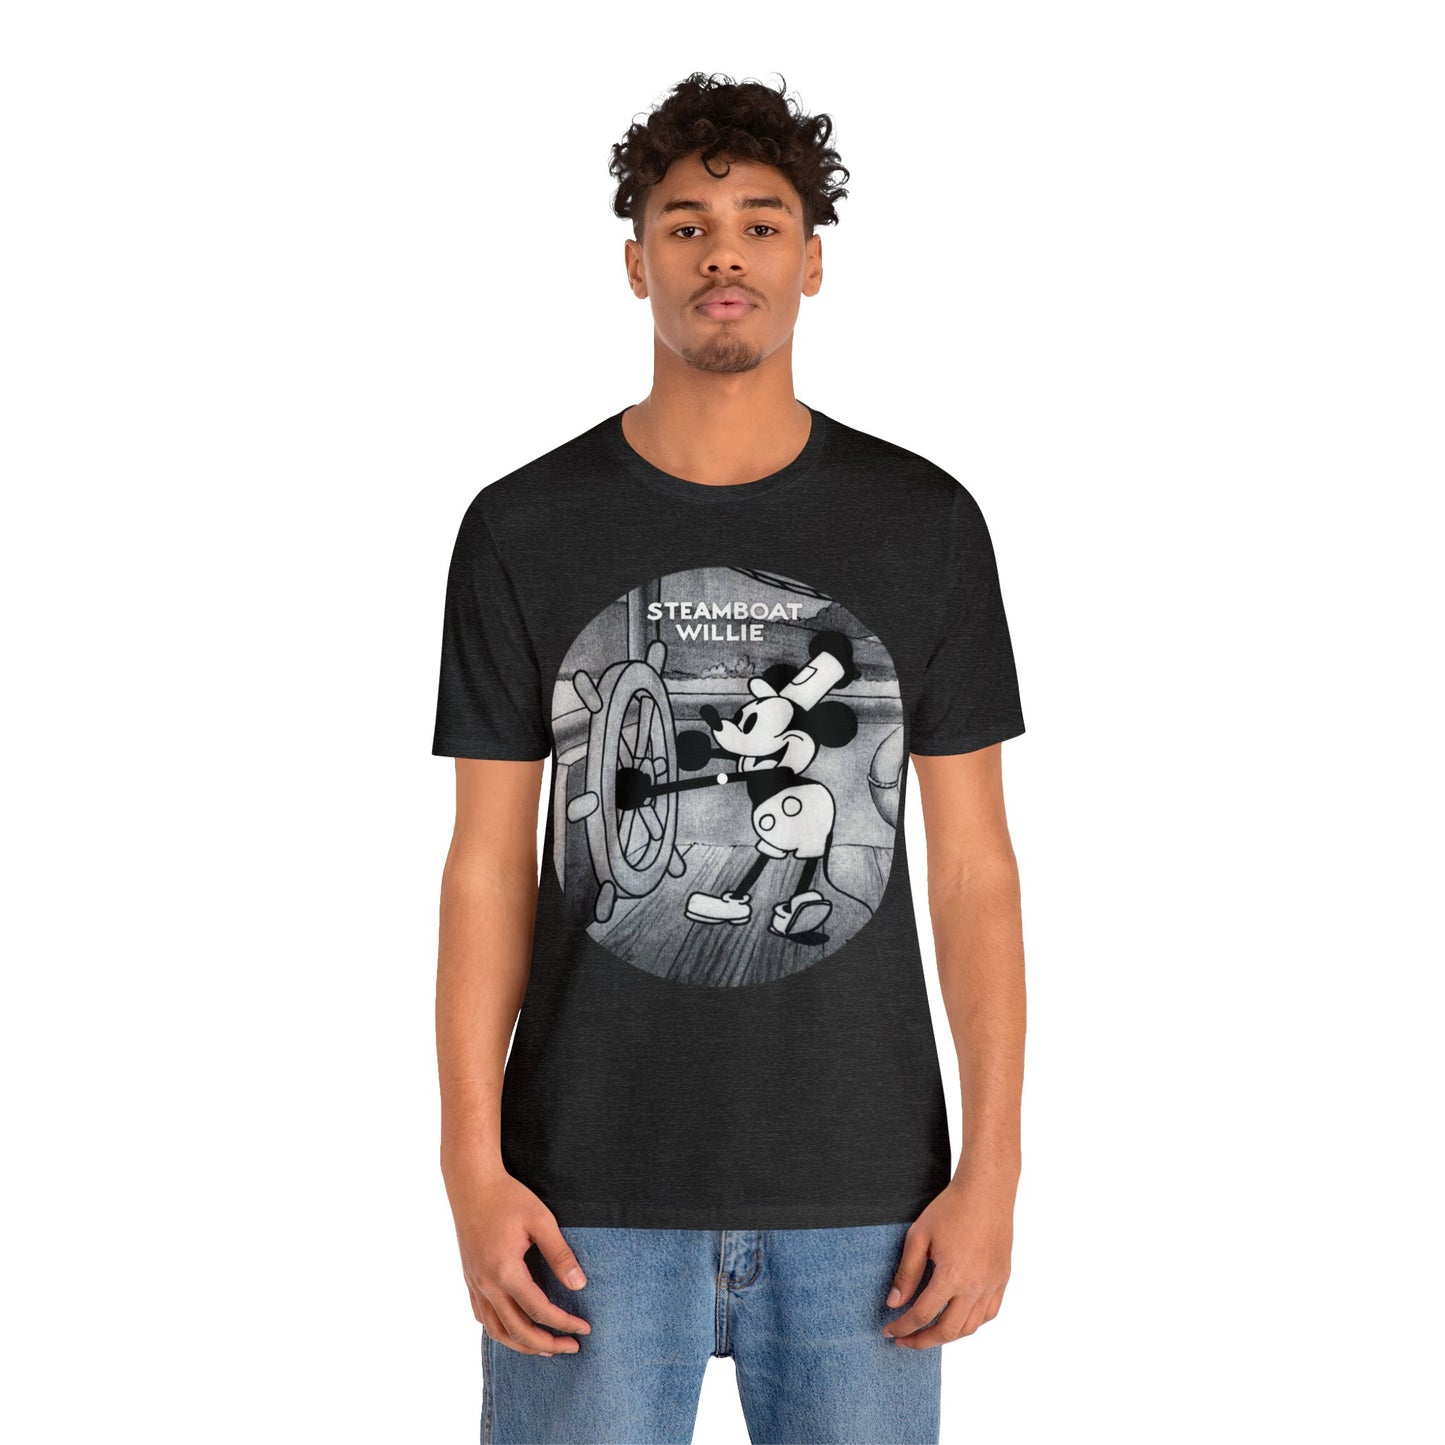 "Steamboat Willie" Unisex Jersey Short Sleeve Tee, Comes in Various Sizes Small to 3XL, Choose Your Color T-shirt